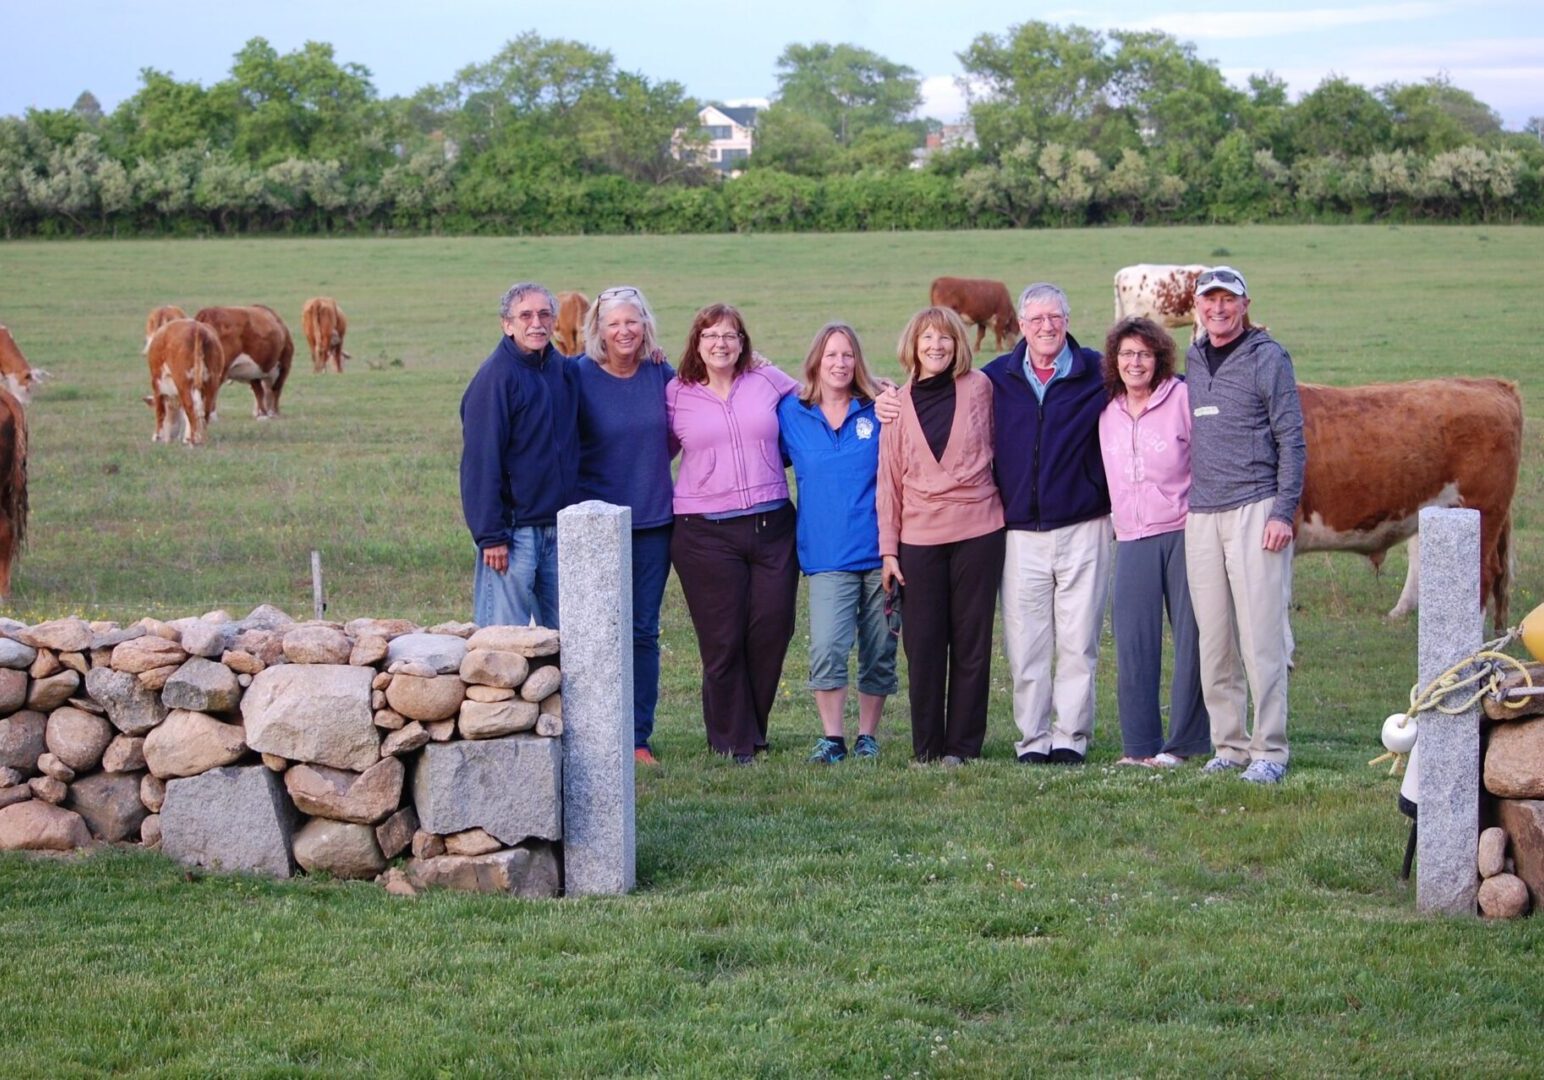 A group of people standing in a field with cows.